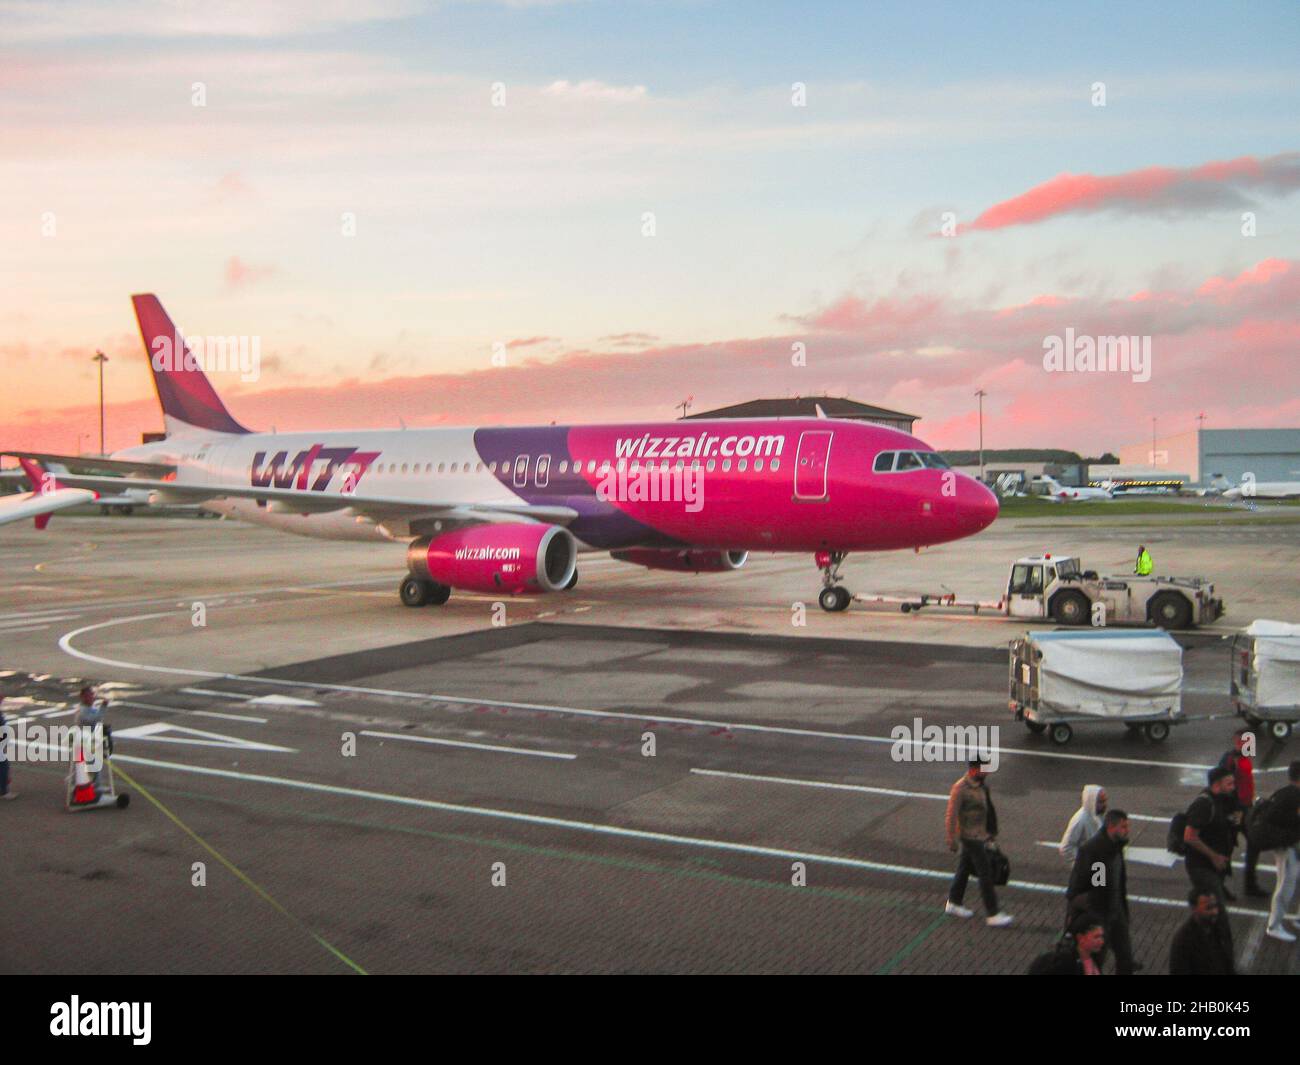 Wizz air in Luton England.Wizzair is a low-cost carrier based in Hungary Stock Photo